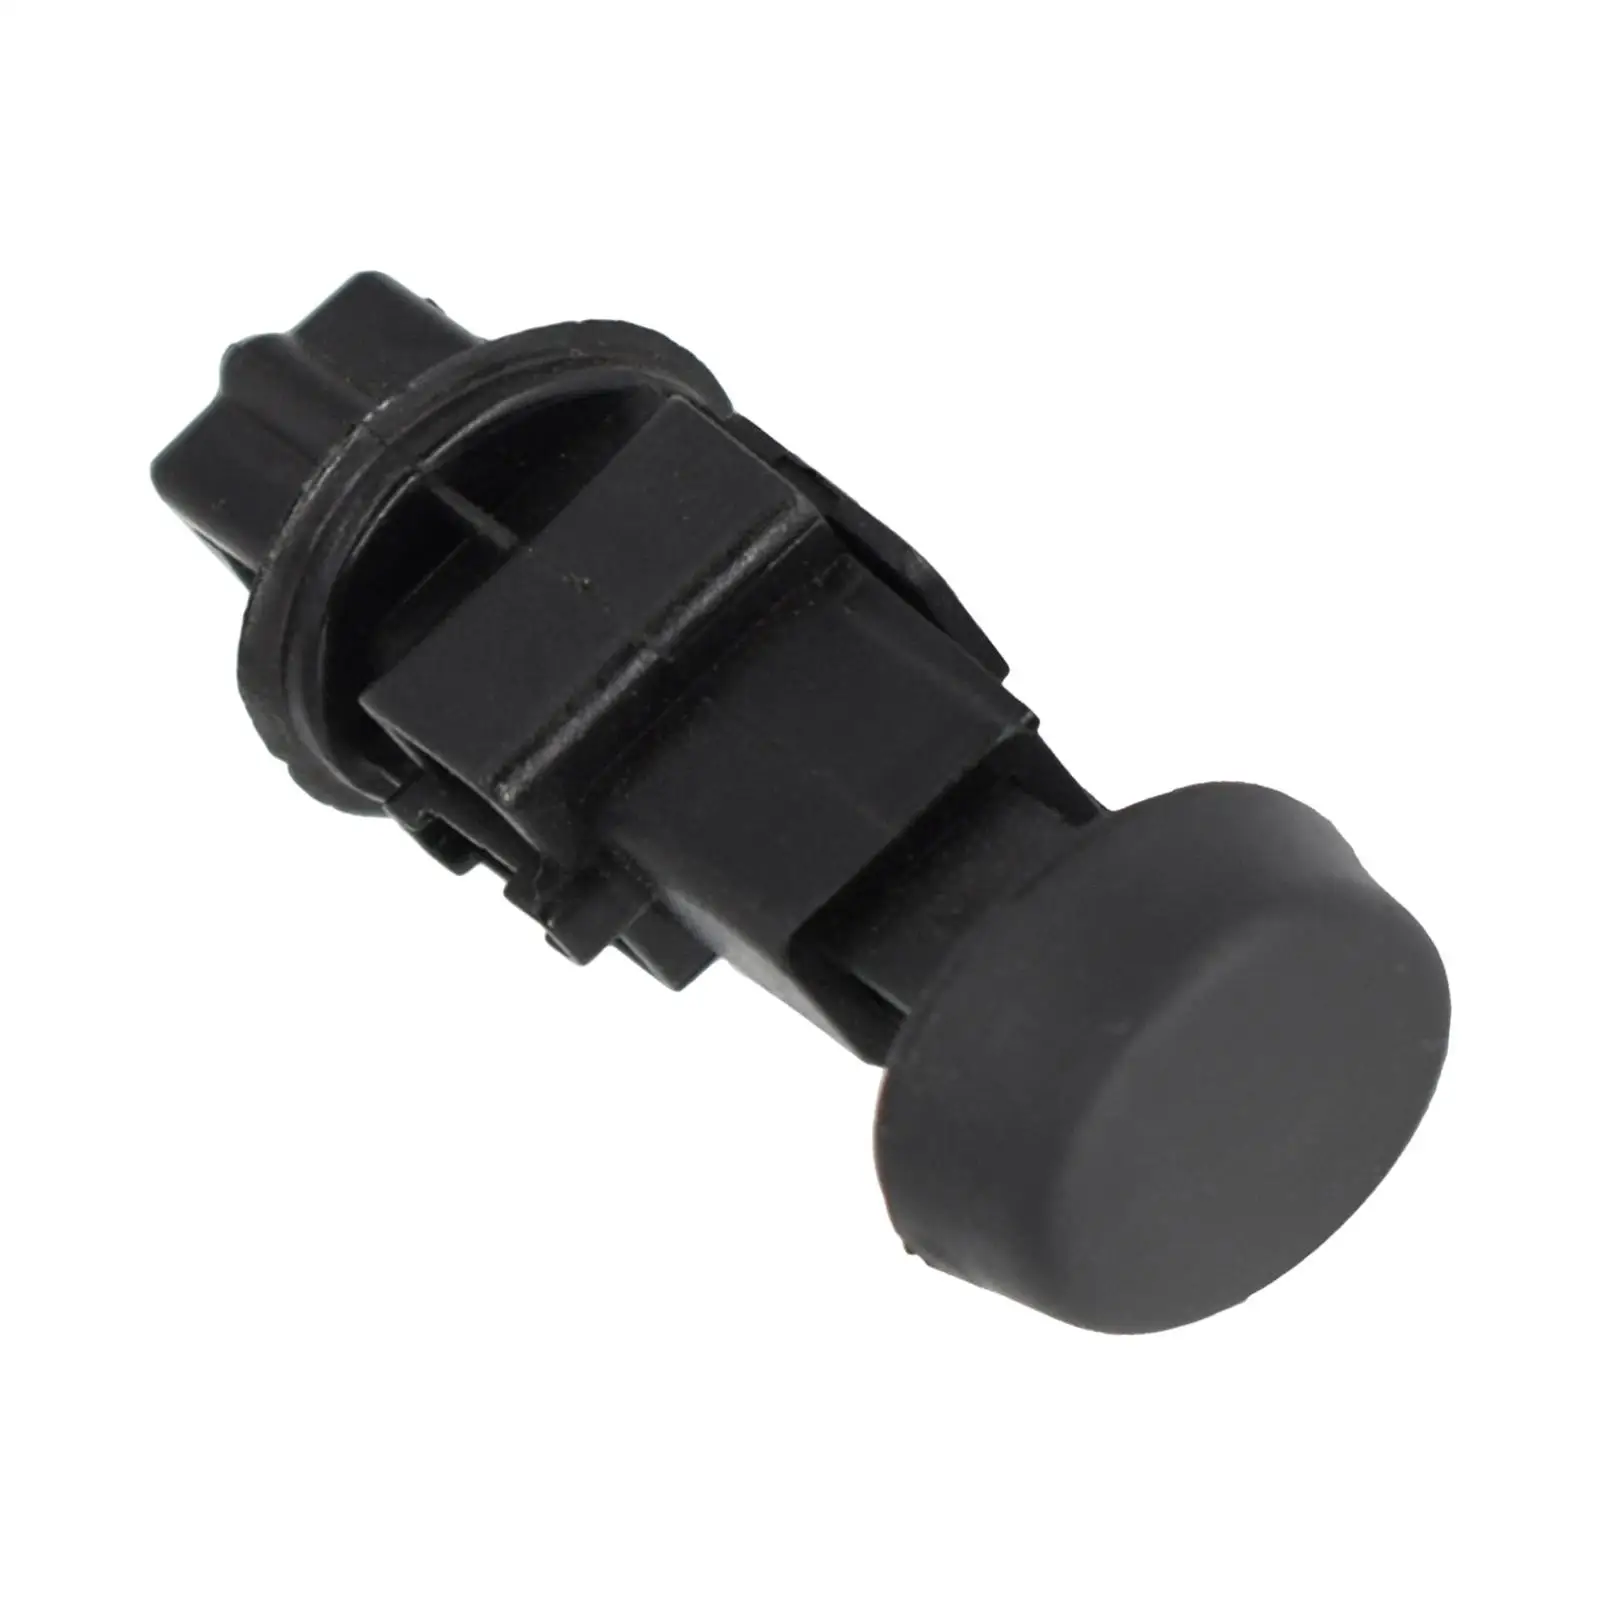 Trunk Hood Stop Buffer, 65822-br00A Replaces Hood Stop Support Buffer for Qashqai ,Black